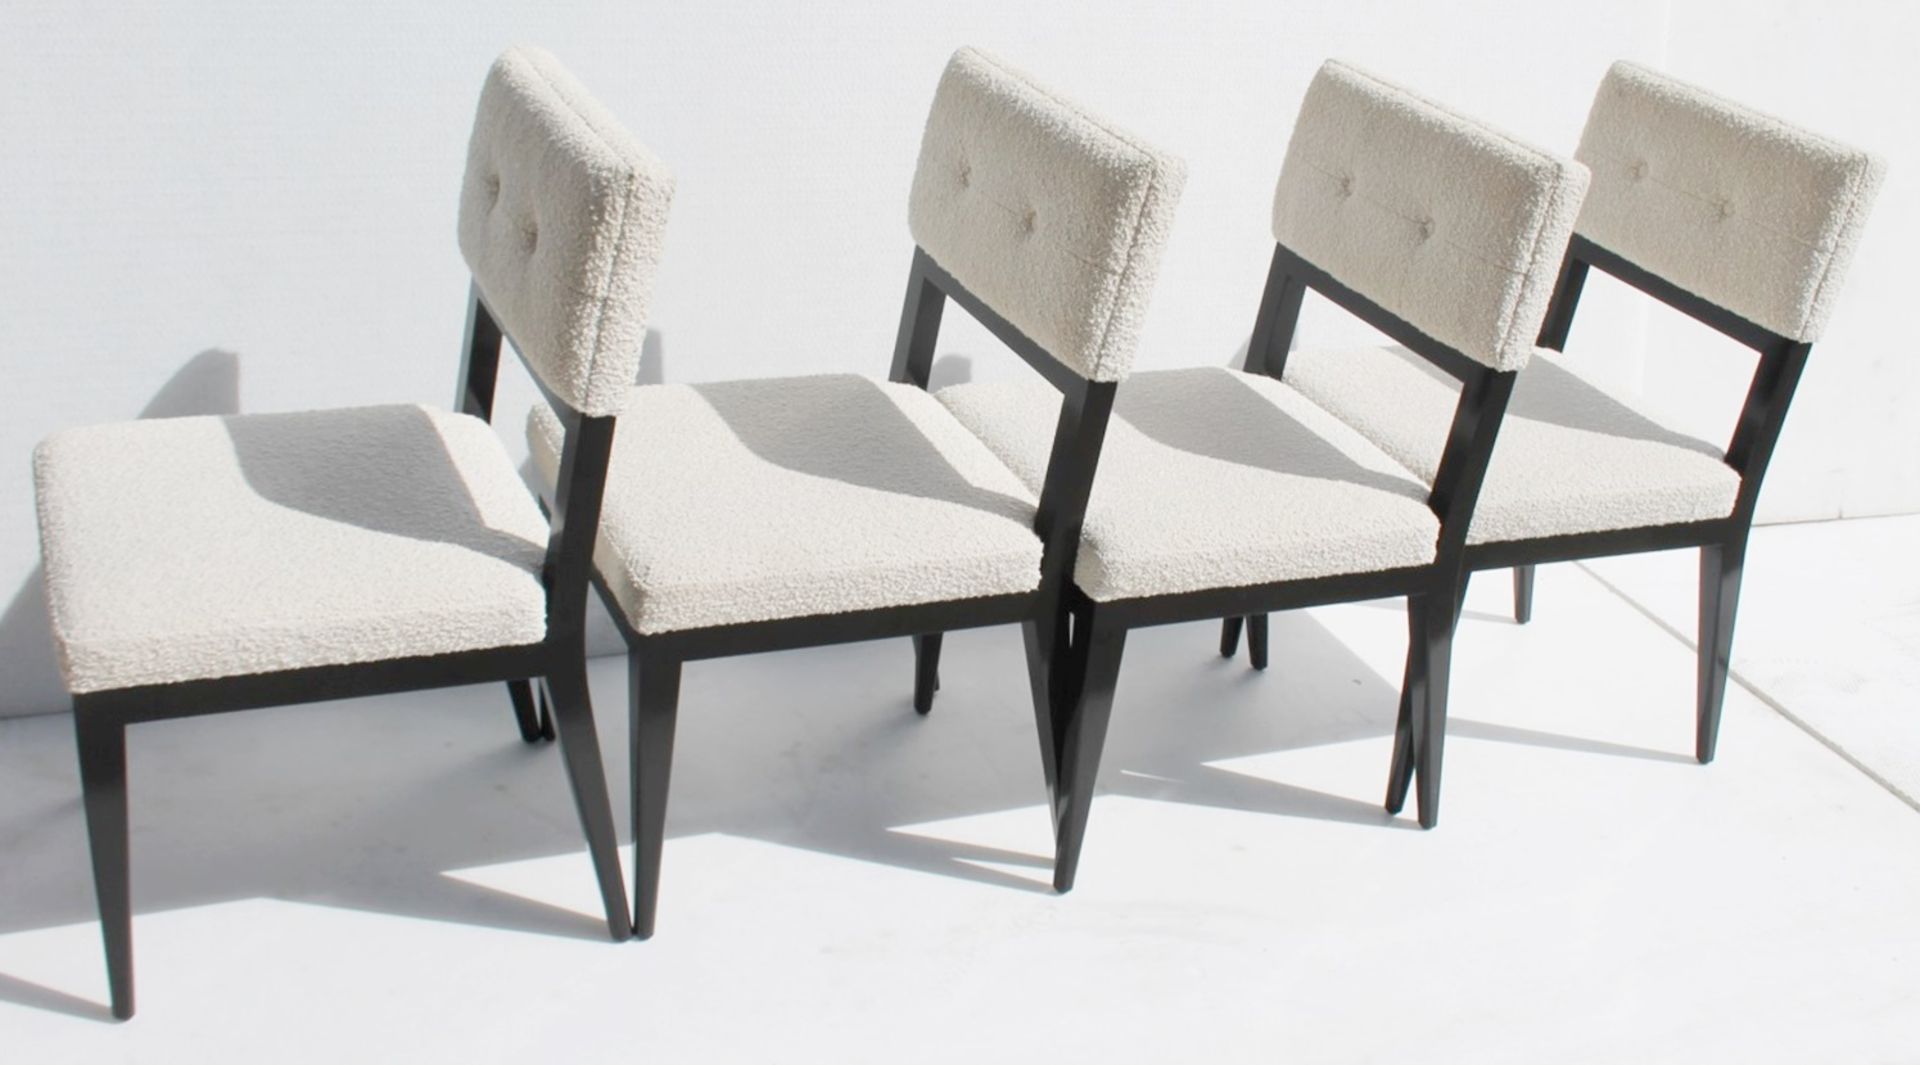 8 x AMY SOMERVILLE LONDON 'Resplendent' Bespoke Dining Chairs - Total Original Price £25,920 - Image 8 of 18